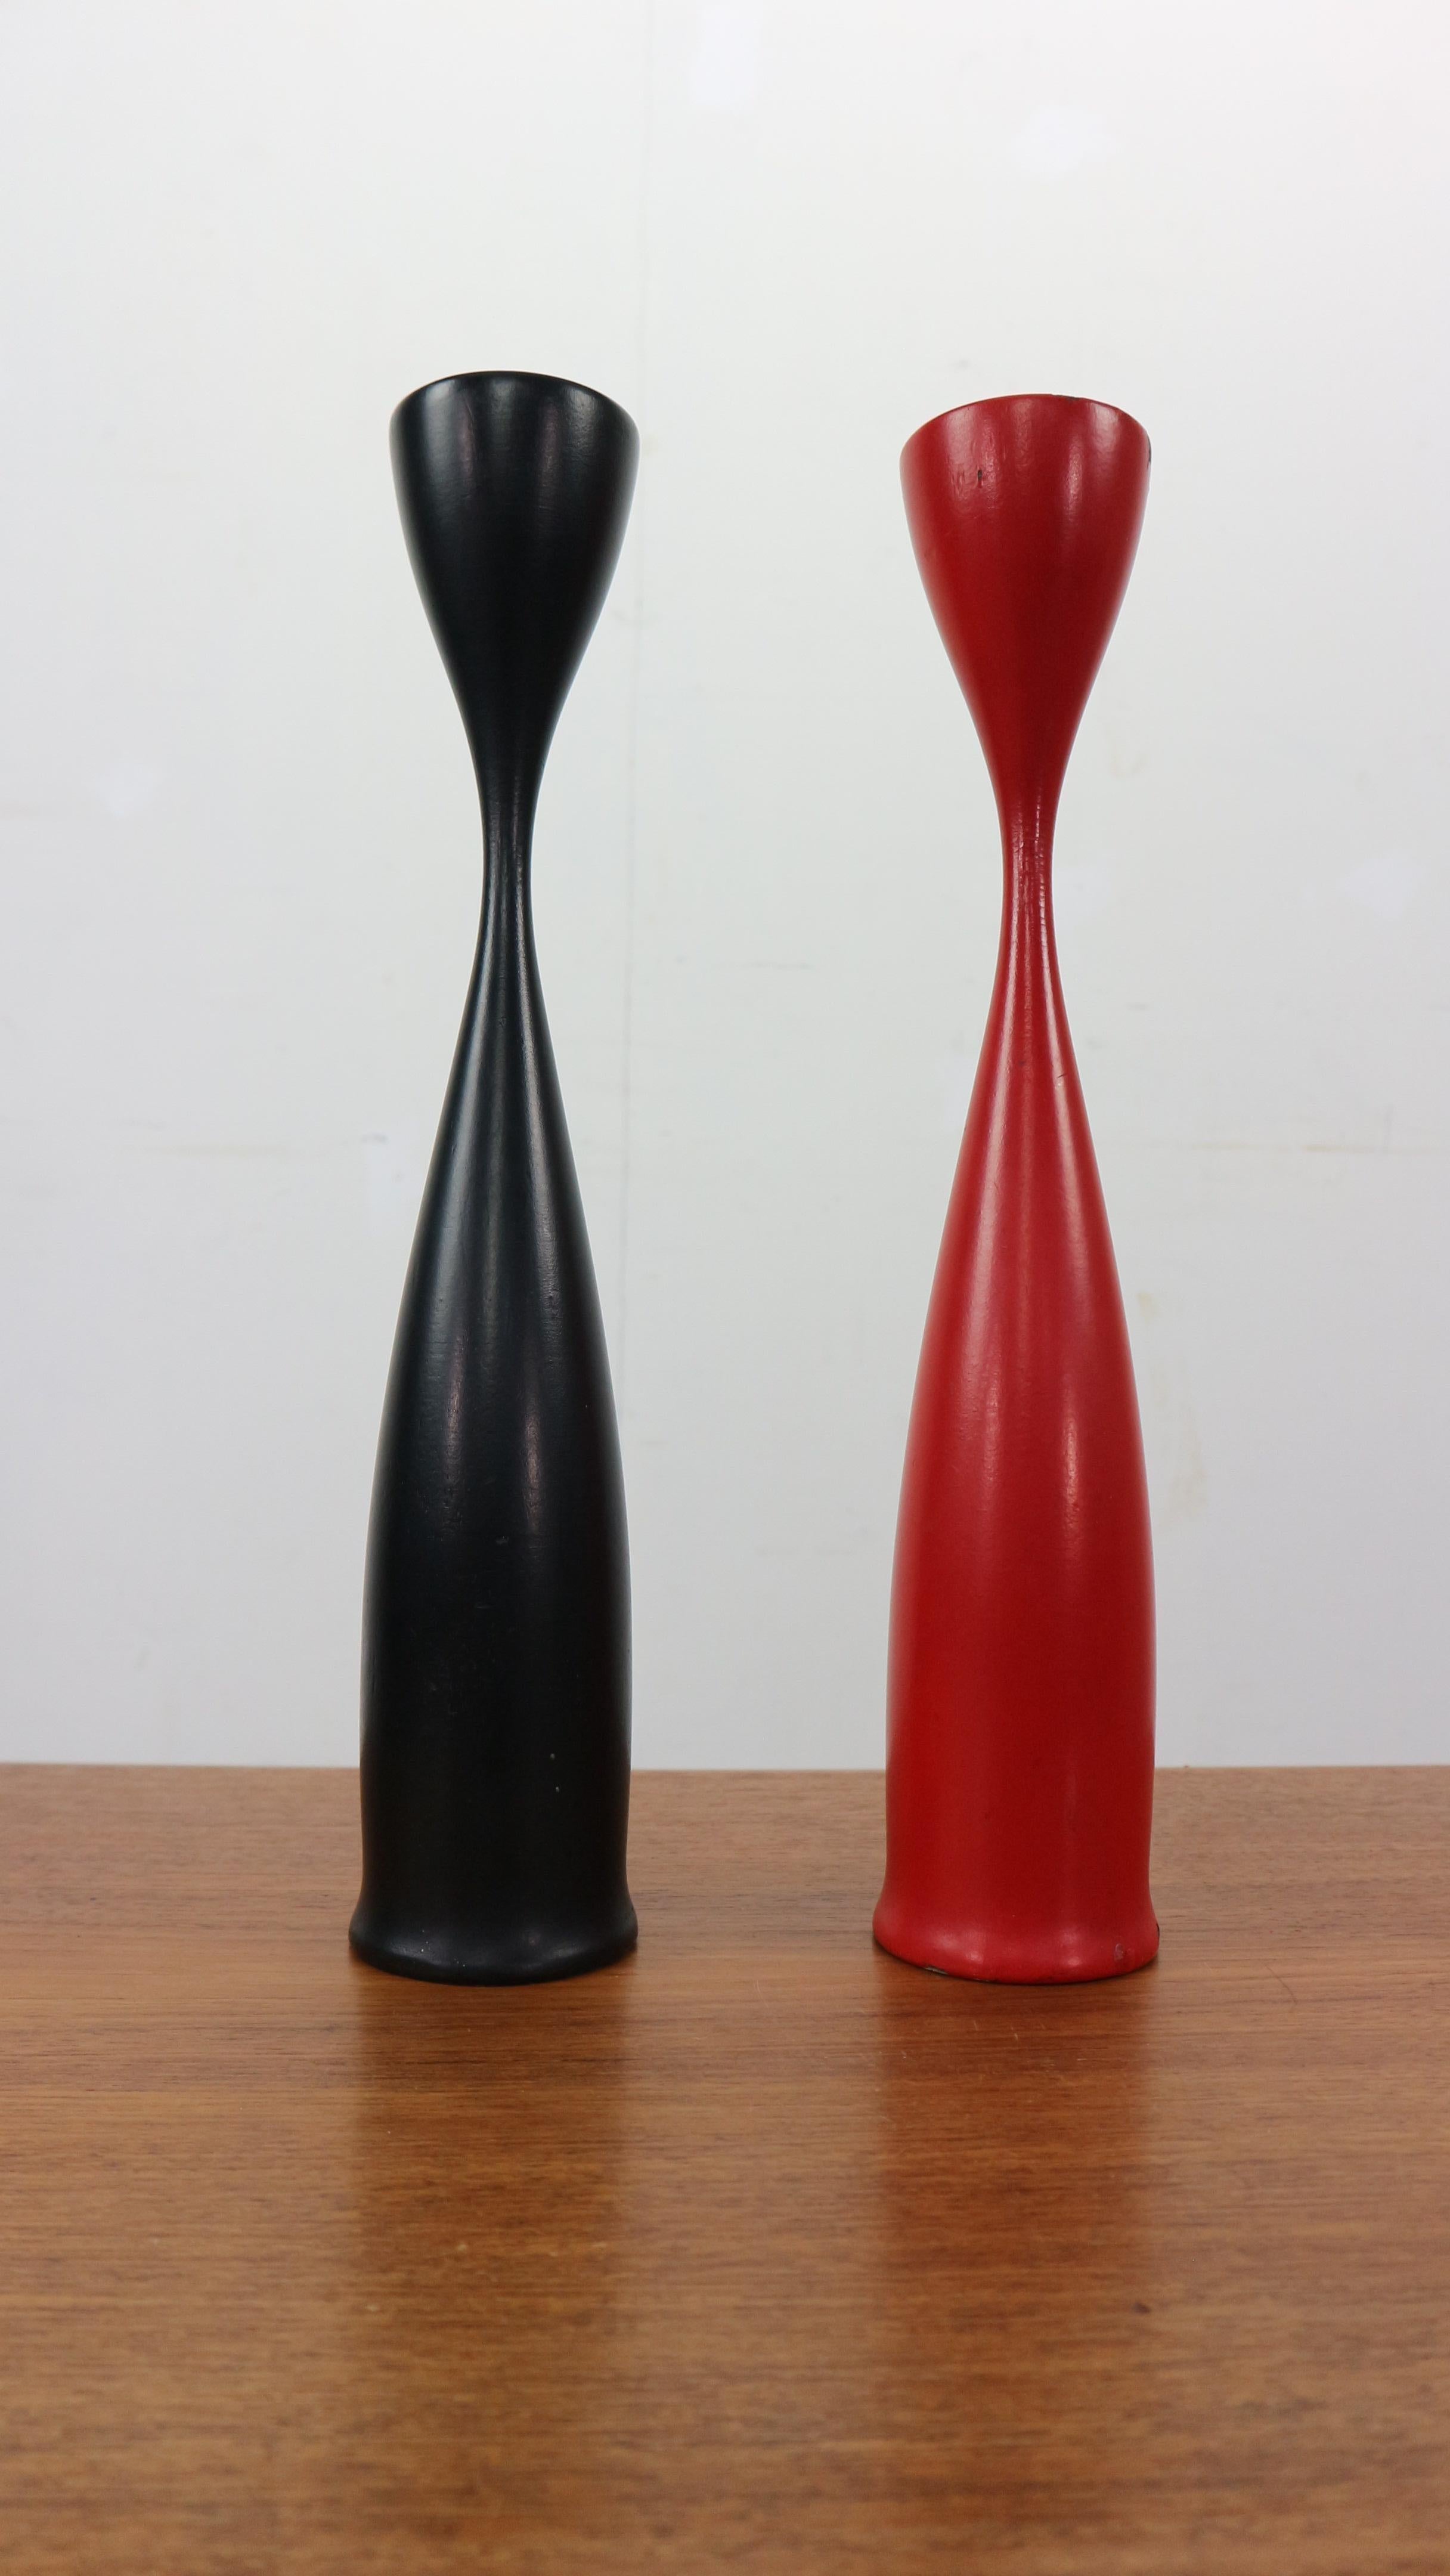 Set of two Scandinavian modern candlesticks made in Sweden, 1960s.
Organically shaped and very decorative design object.

